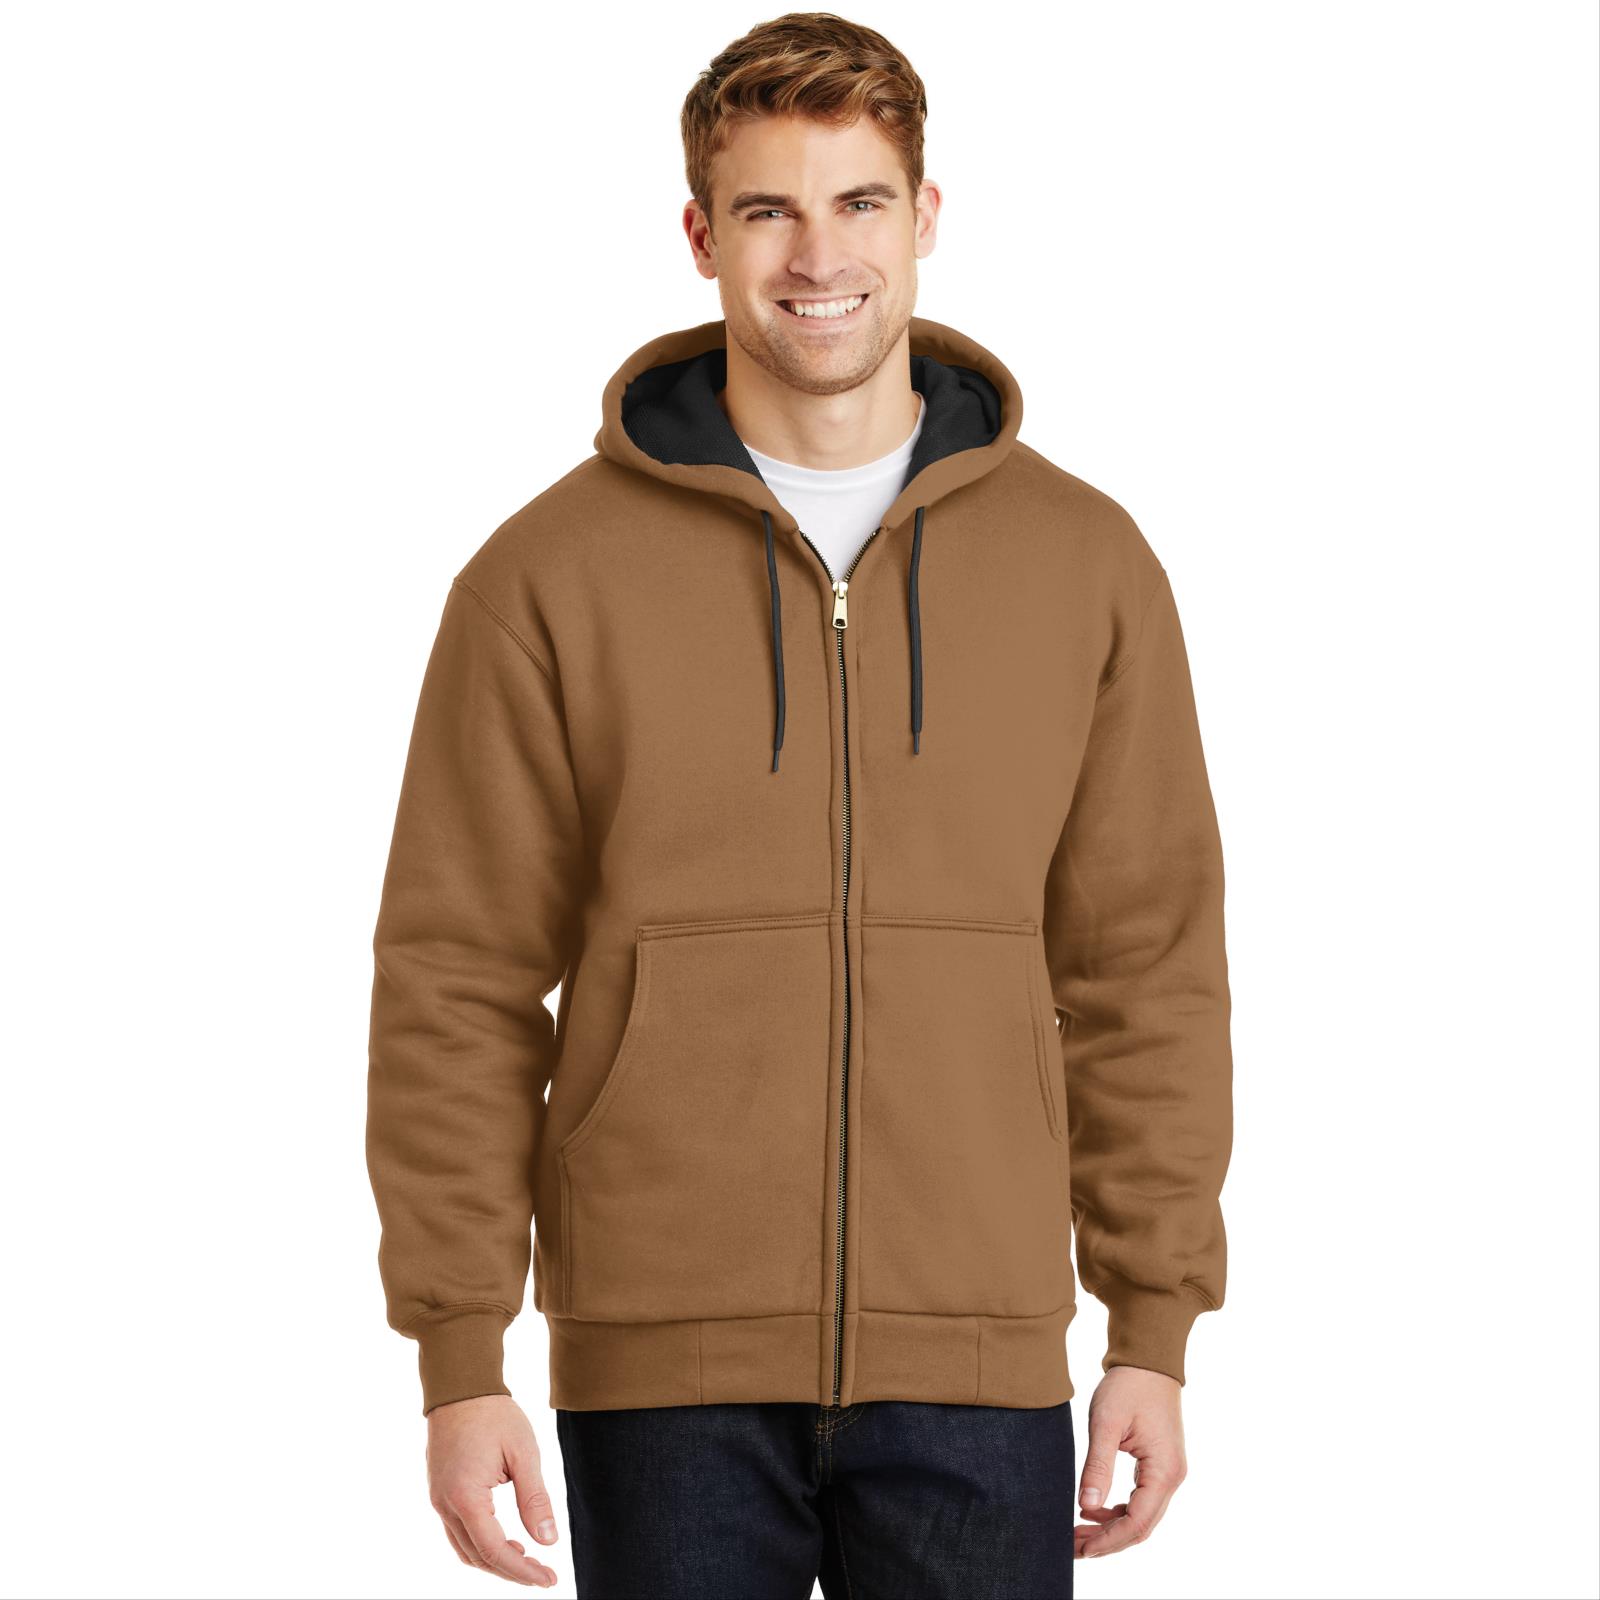 Safety Products Inc - CornerStone® Heavyweight Full-Zip Hooded ...